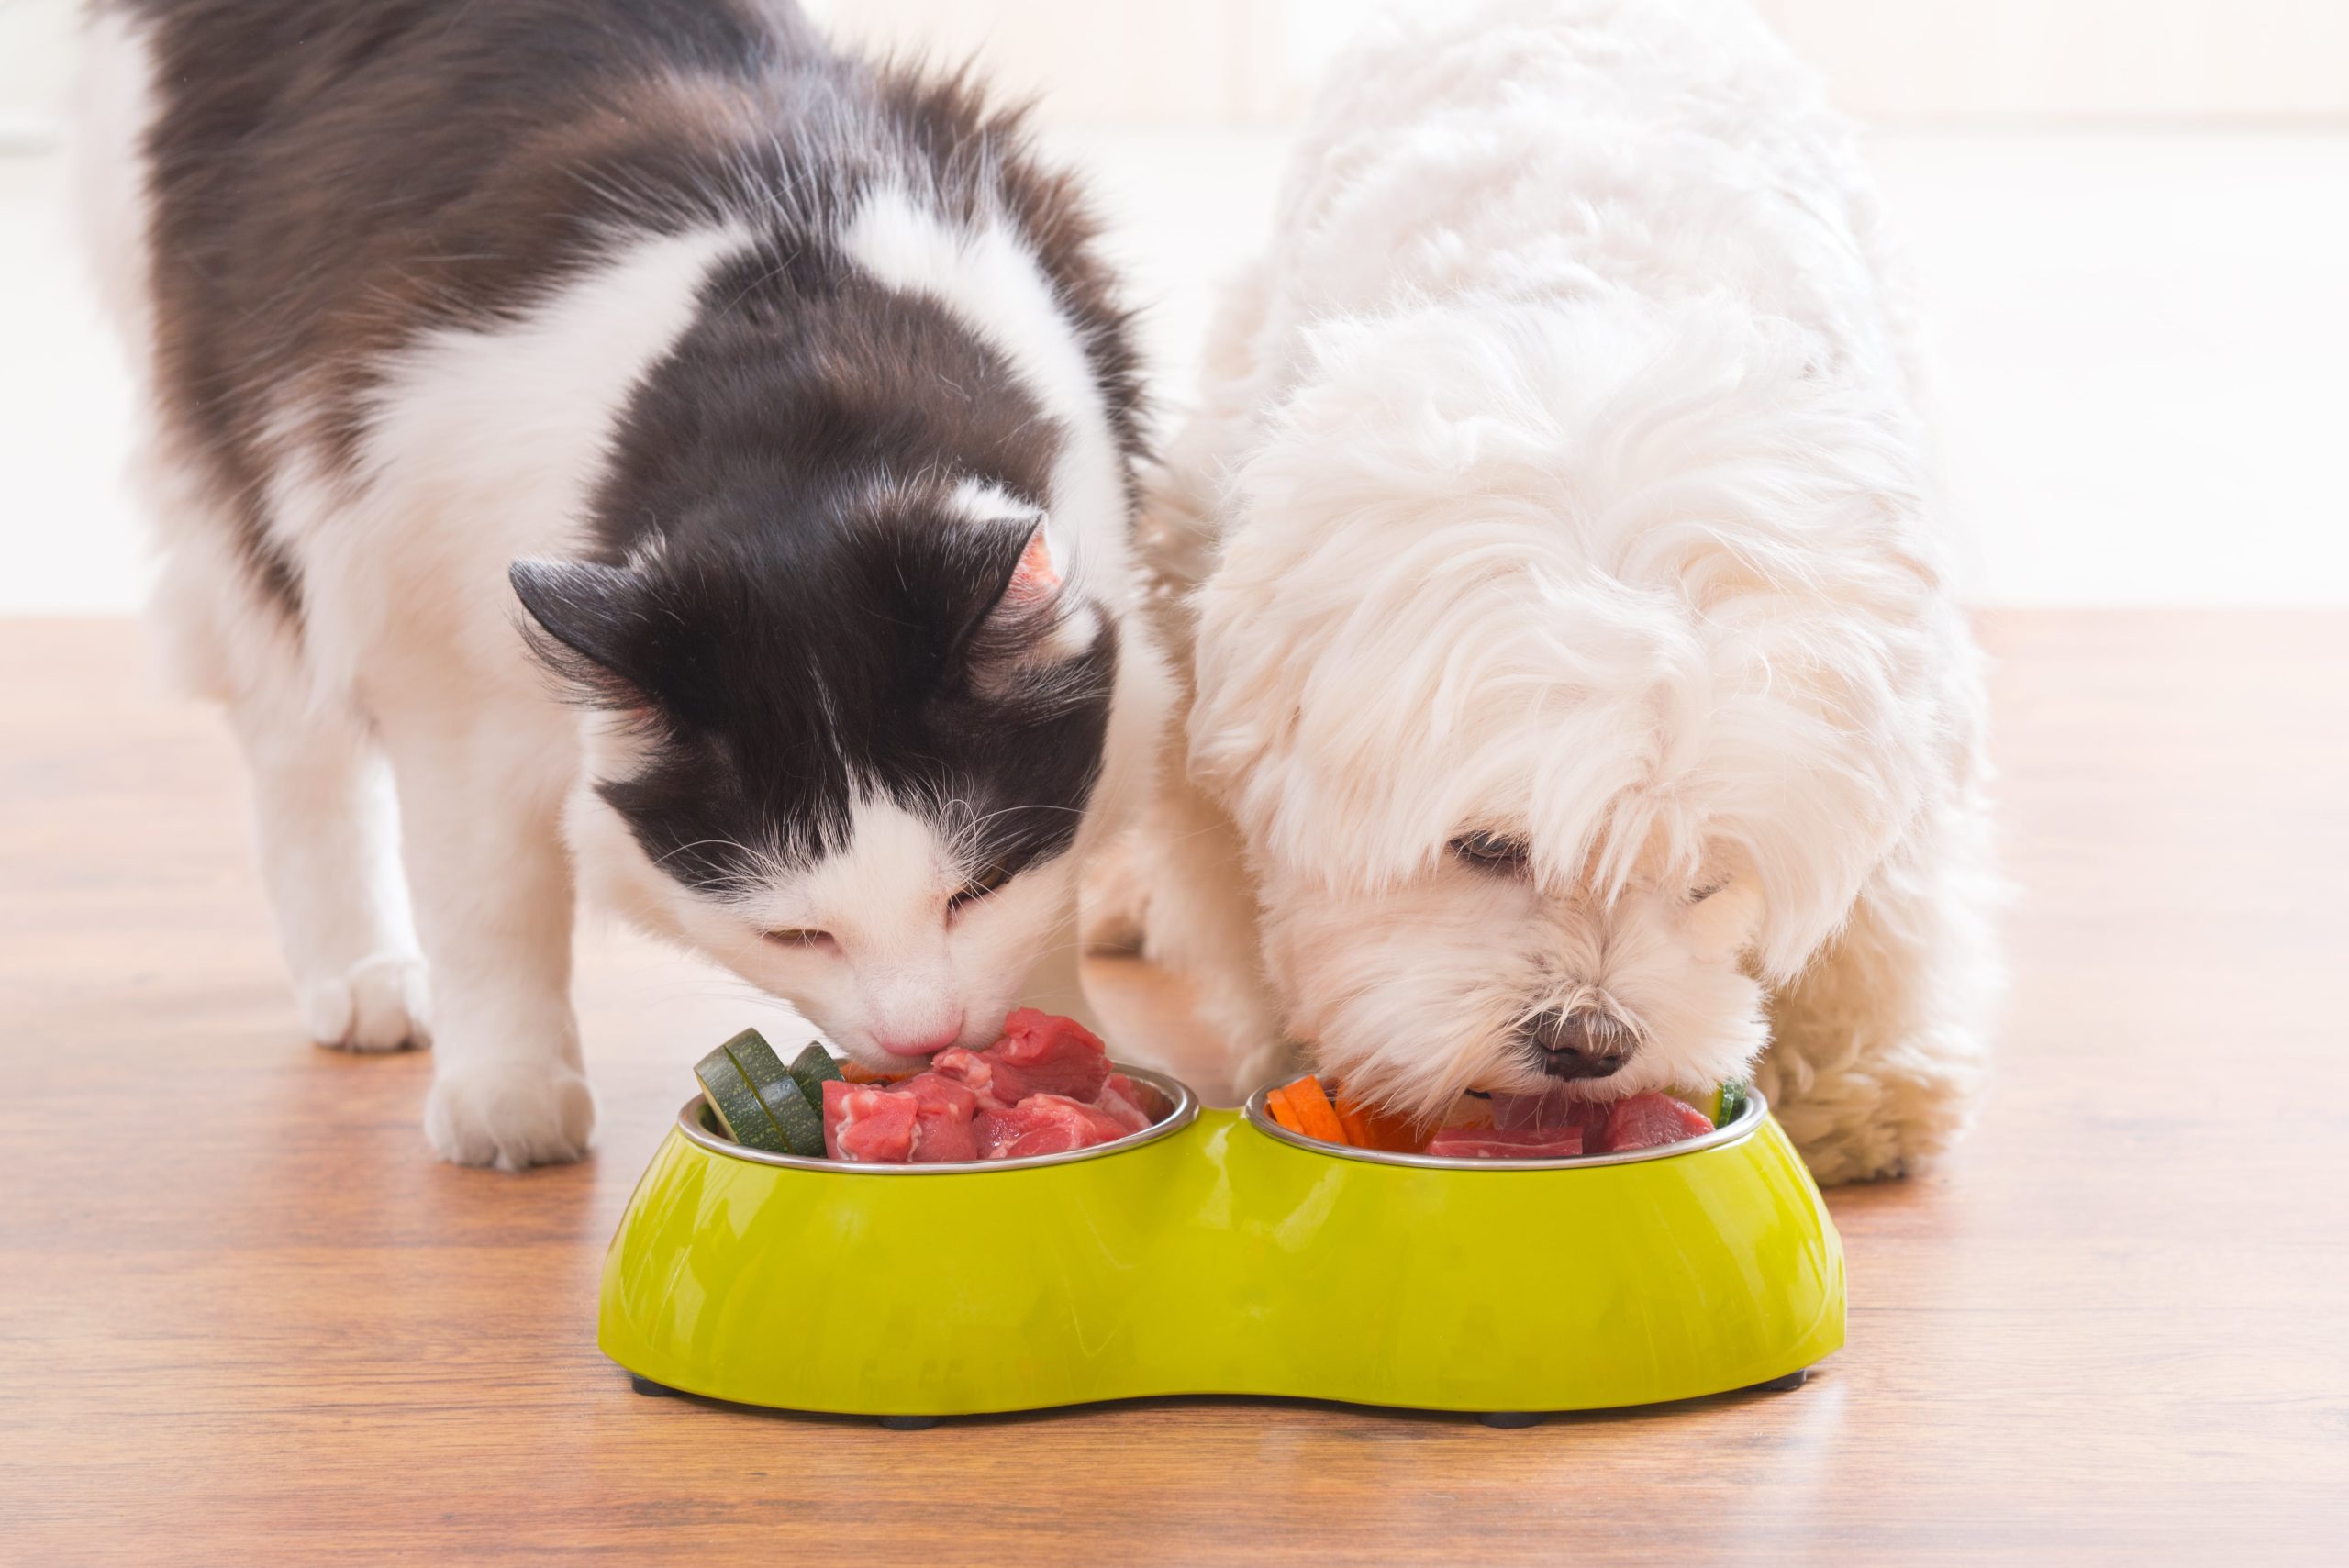 Dog and cat eating